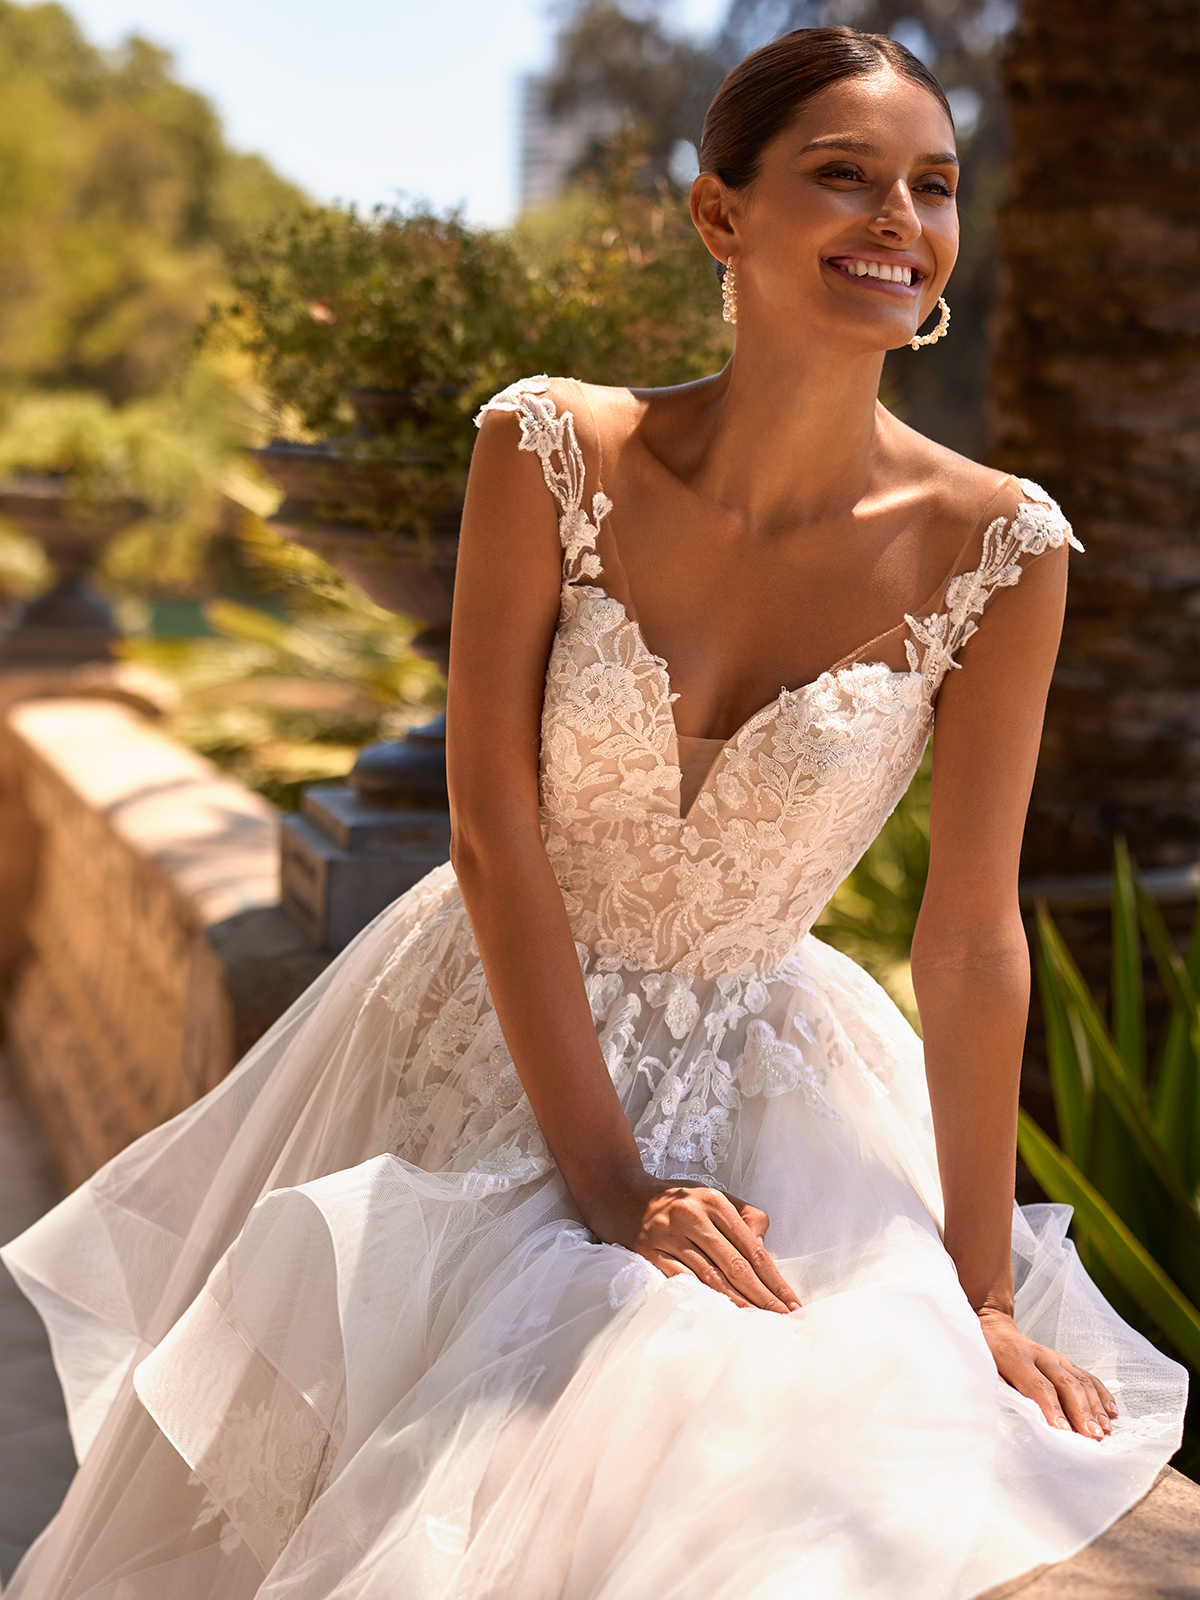 One Shoulder Wedding Dresses: 11 Seriously Stunning Styles -   